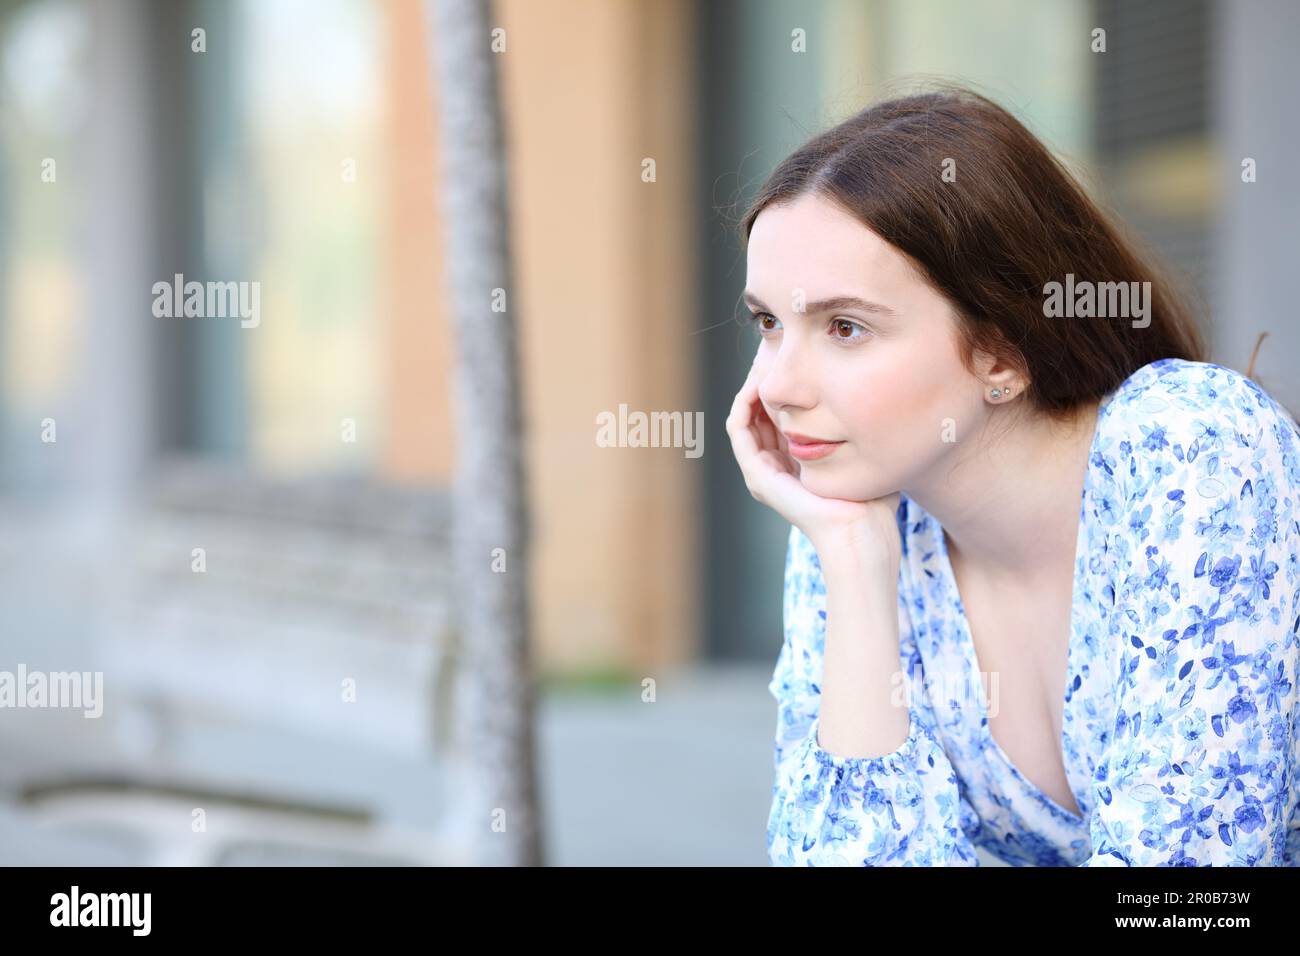 Pensive woman contemplating sitting alone in the street Stock Photo